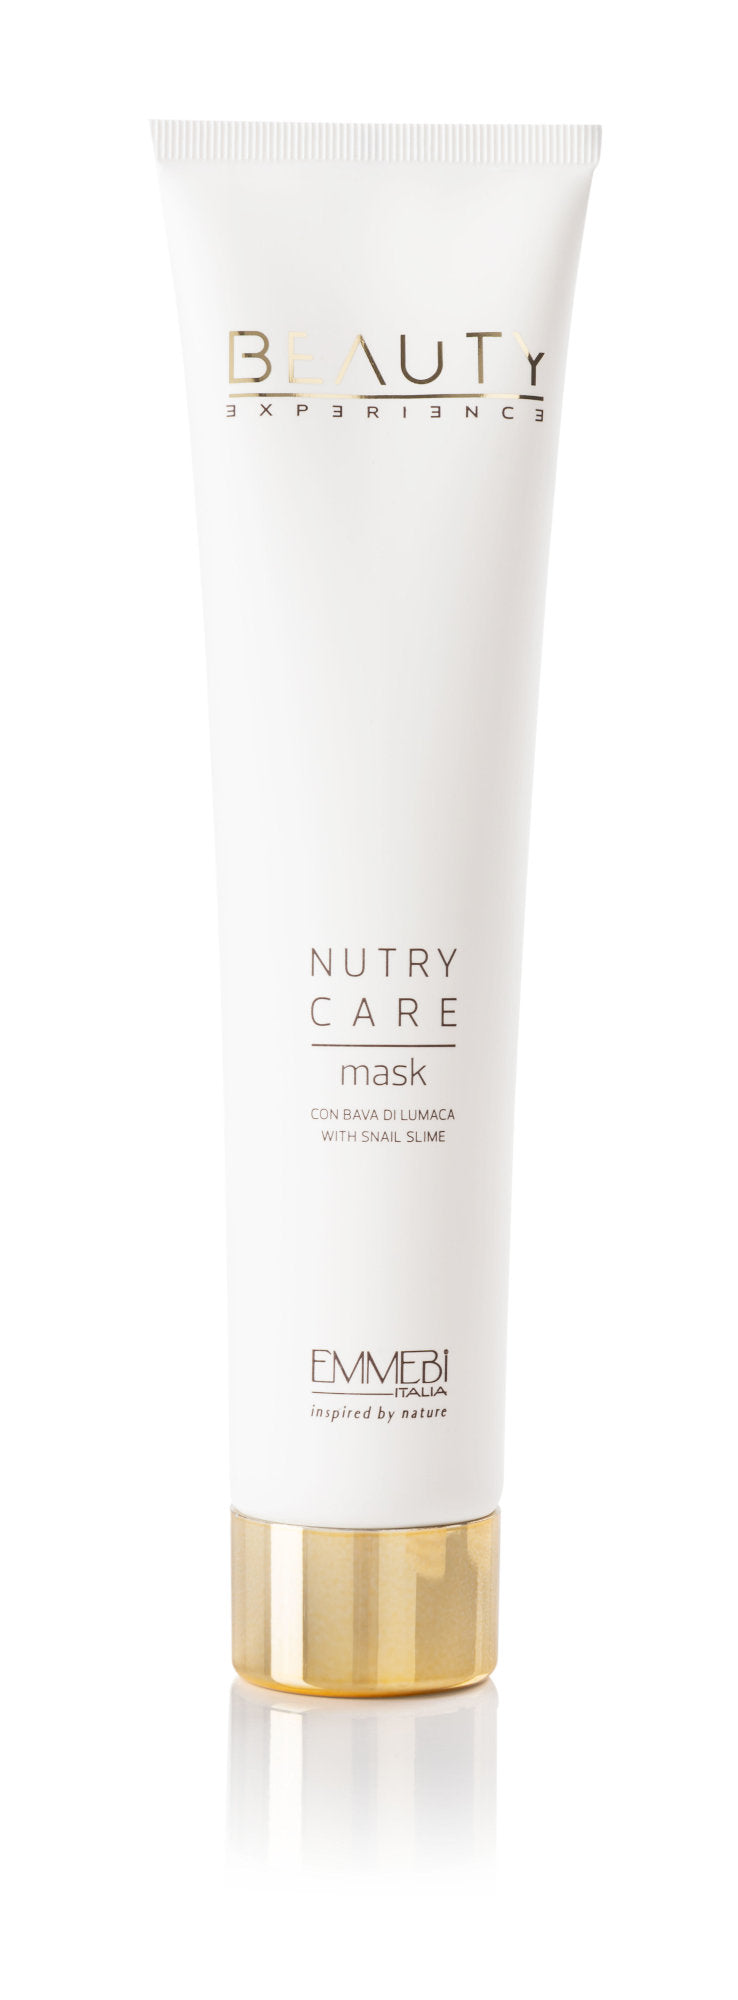 Nutry Care Mask - Regenerating hair mask with Vitamin E and Silk Proteins - 200 ml